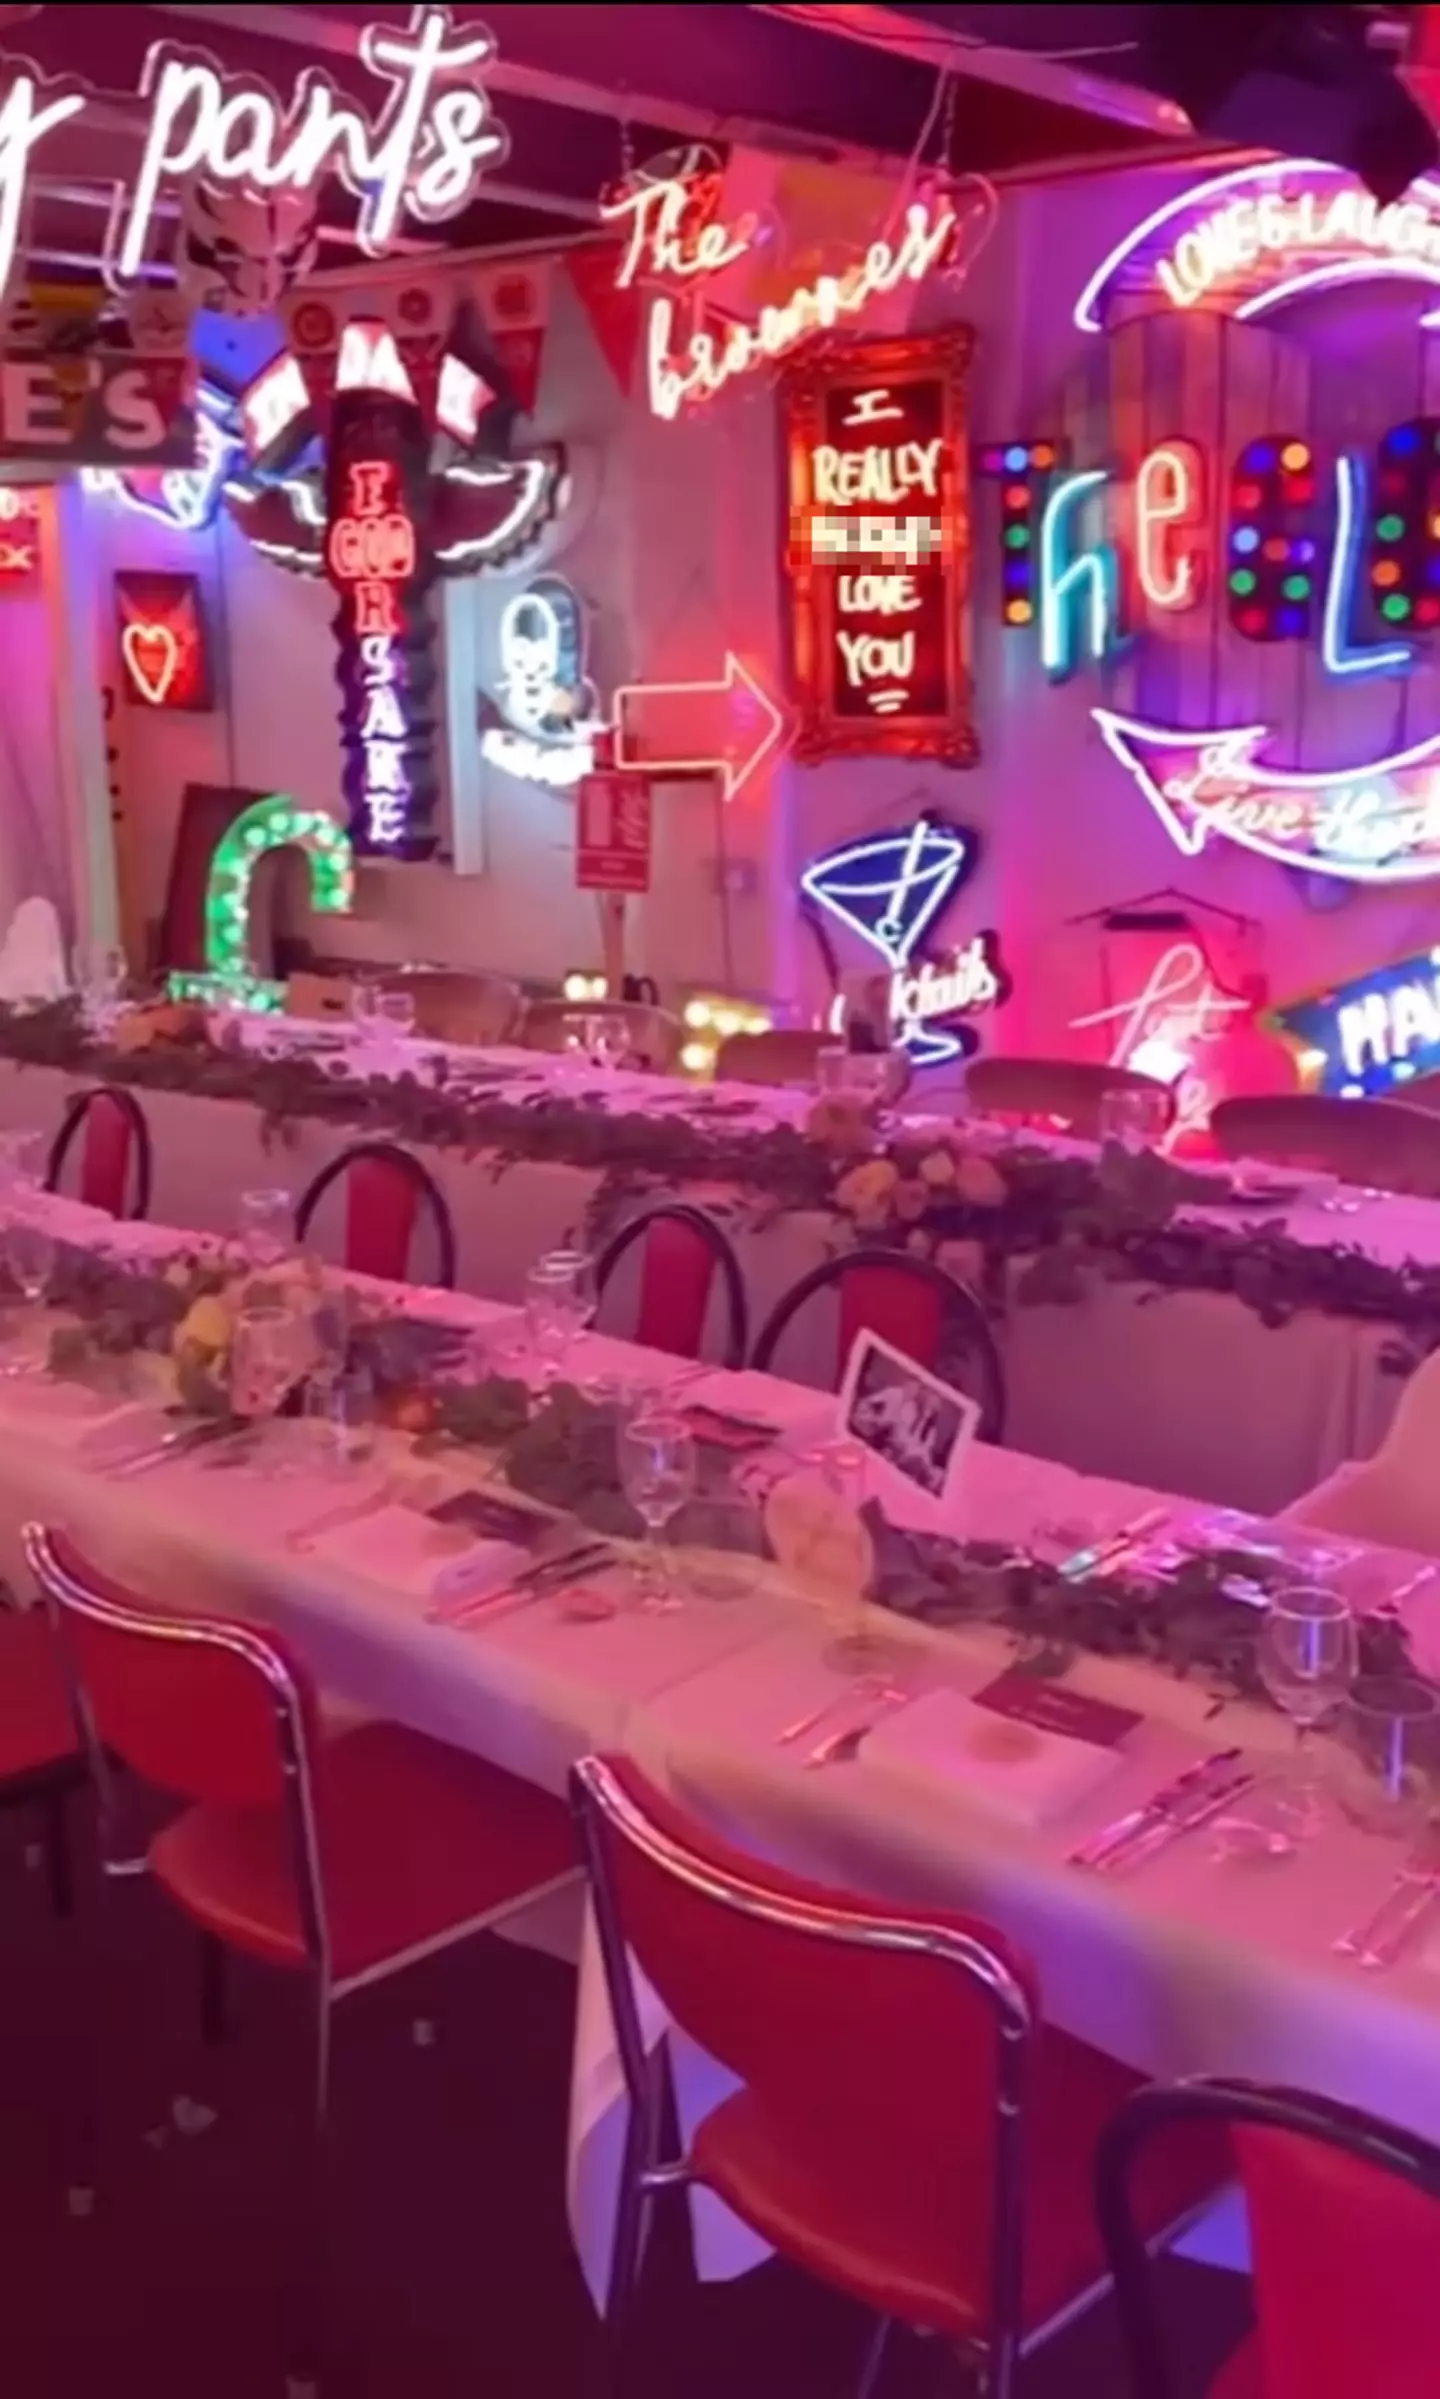 You can get married in a neon wonderland in London.